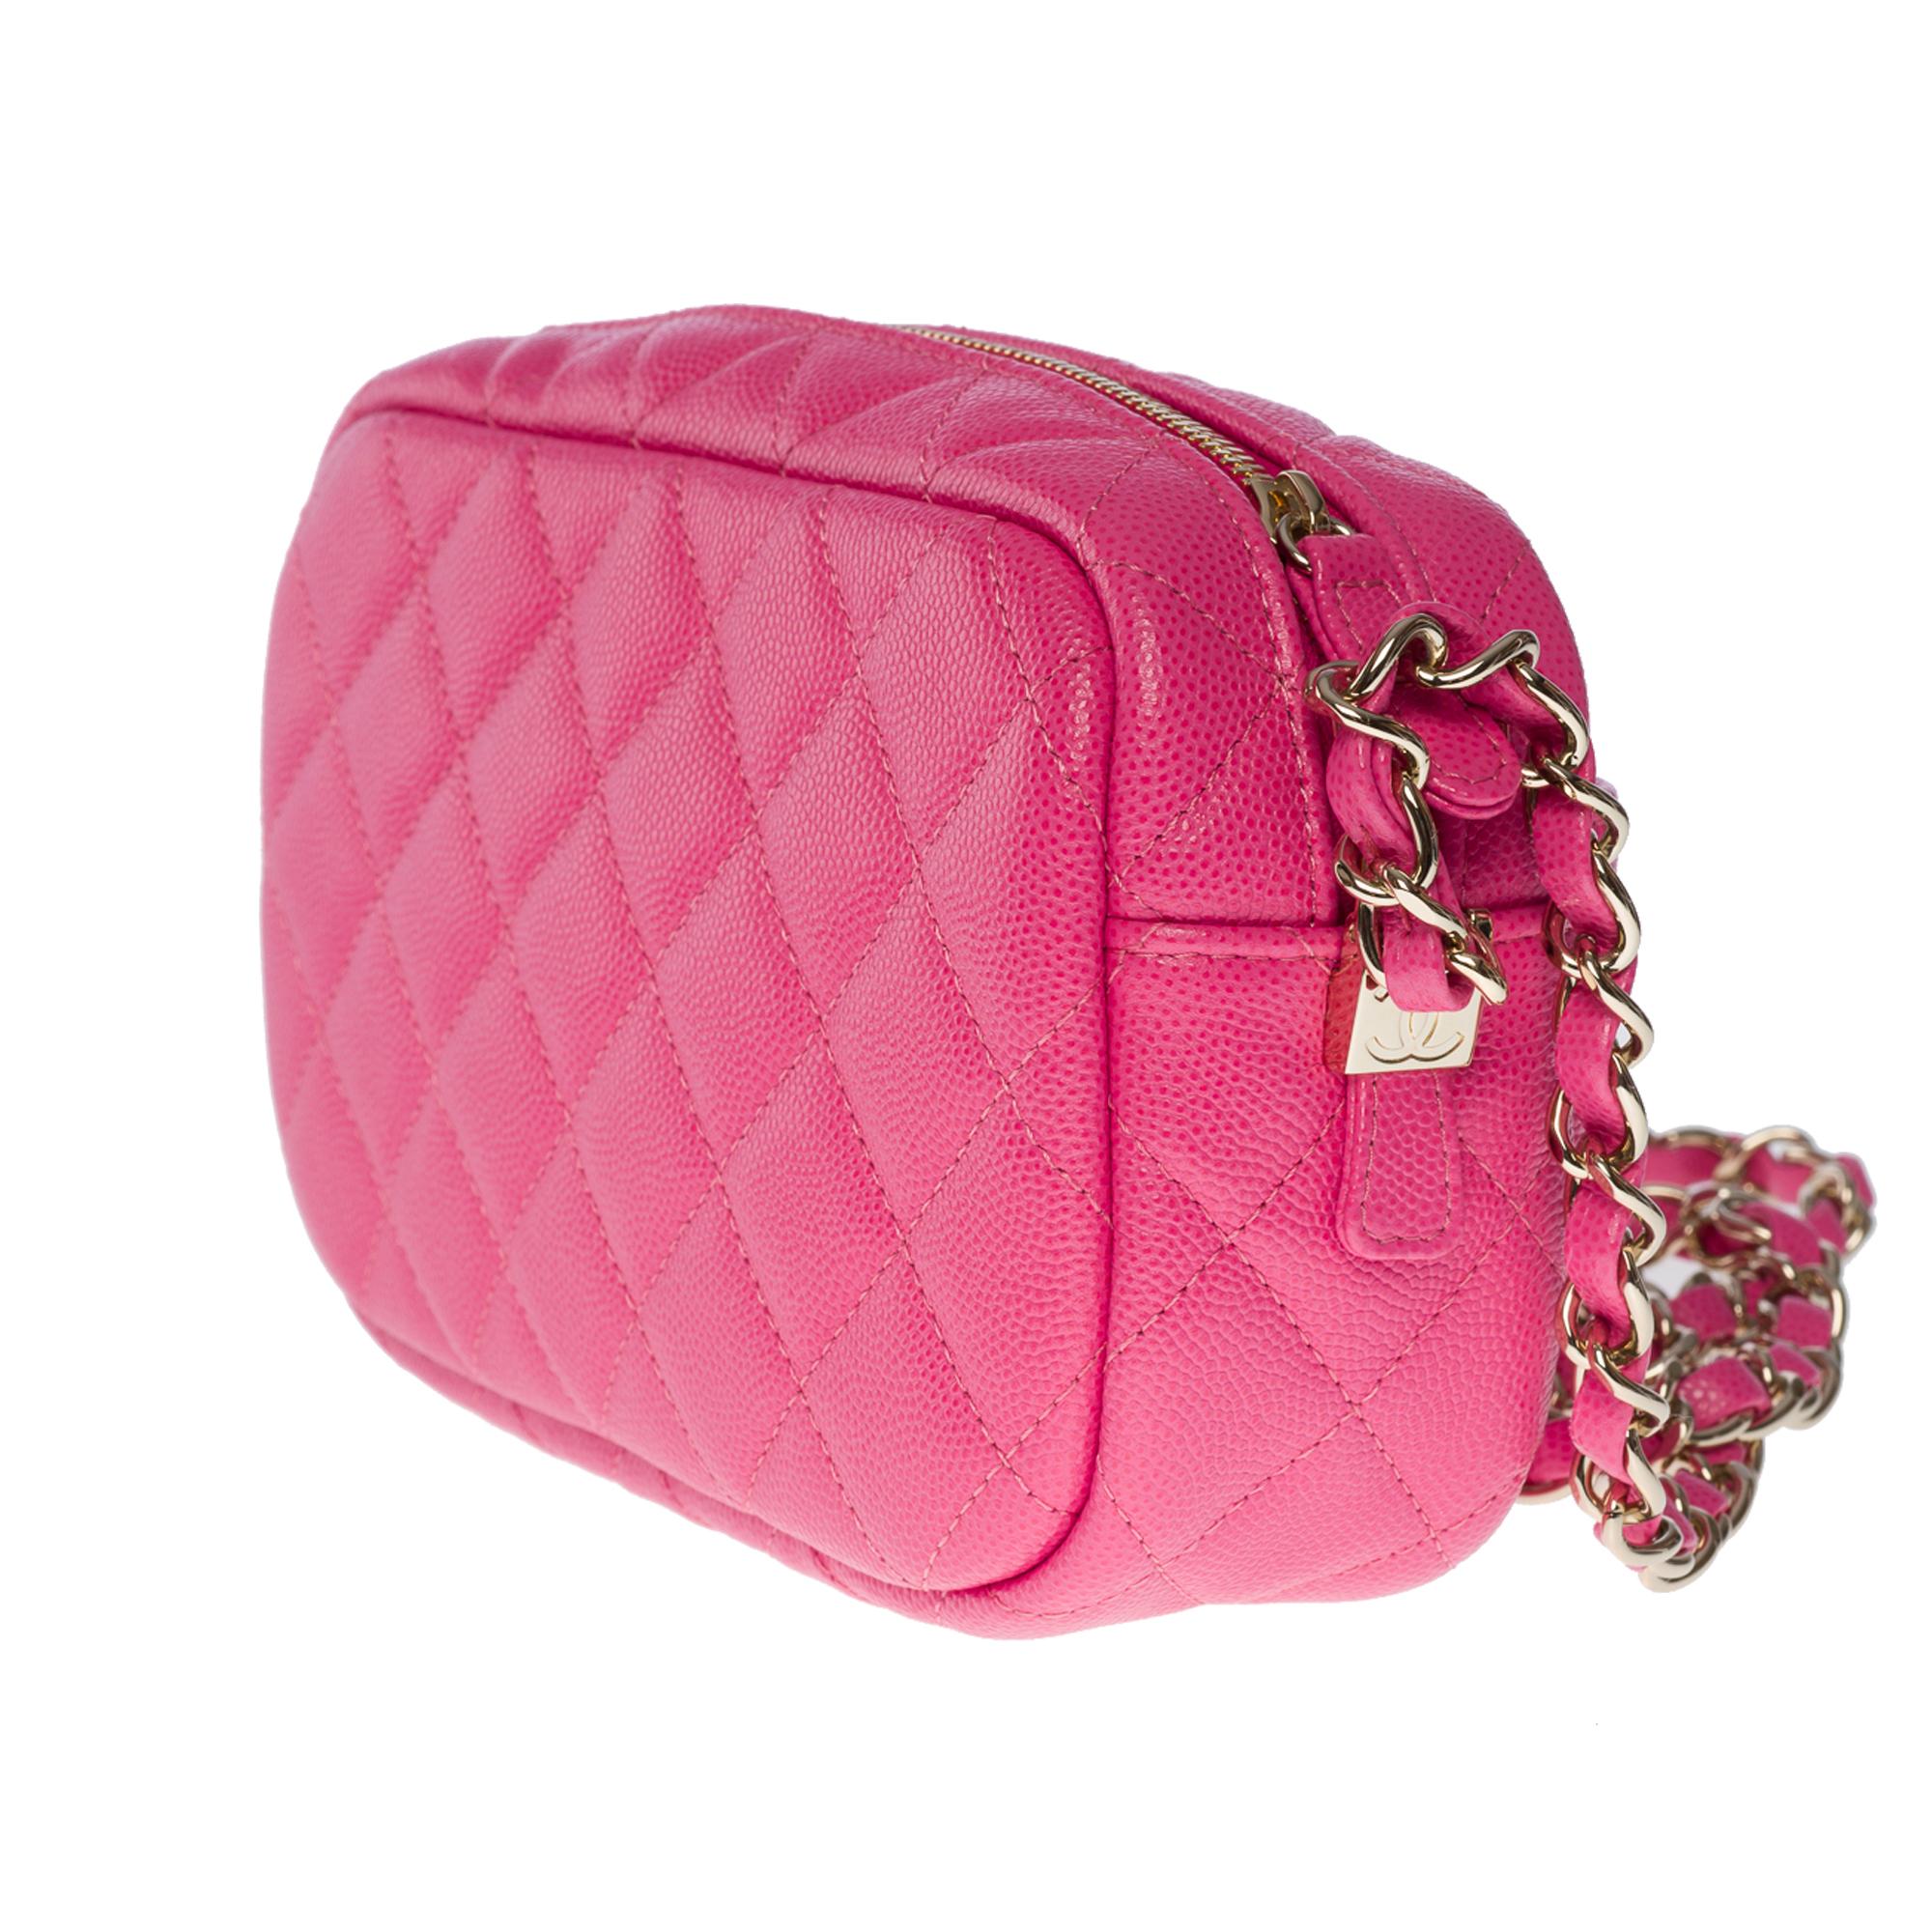 Women's New- Amazing Chanel Mini Camera shoulder bag in Pink caviar leather, CHW